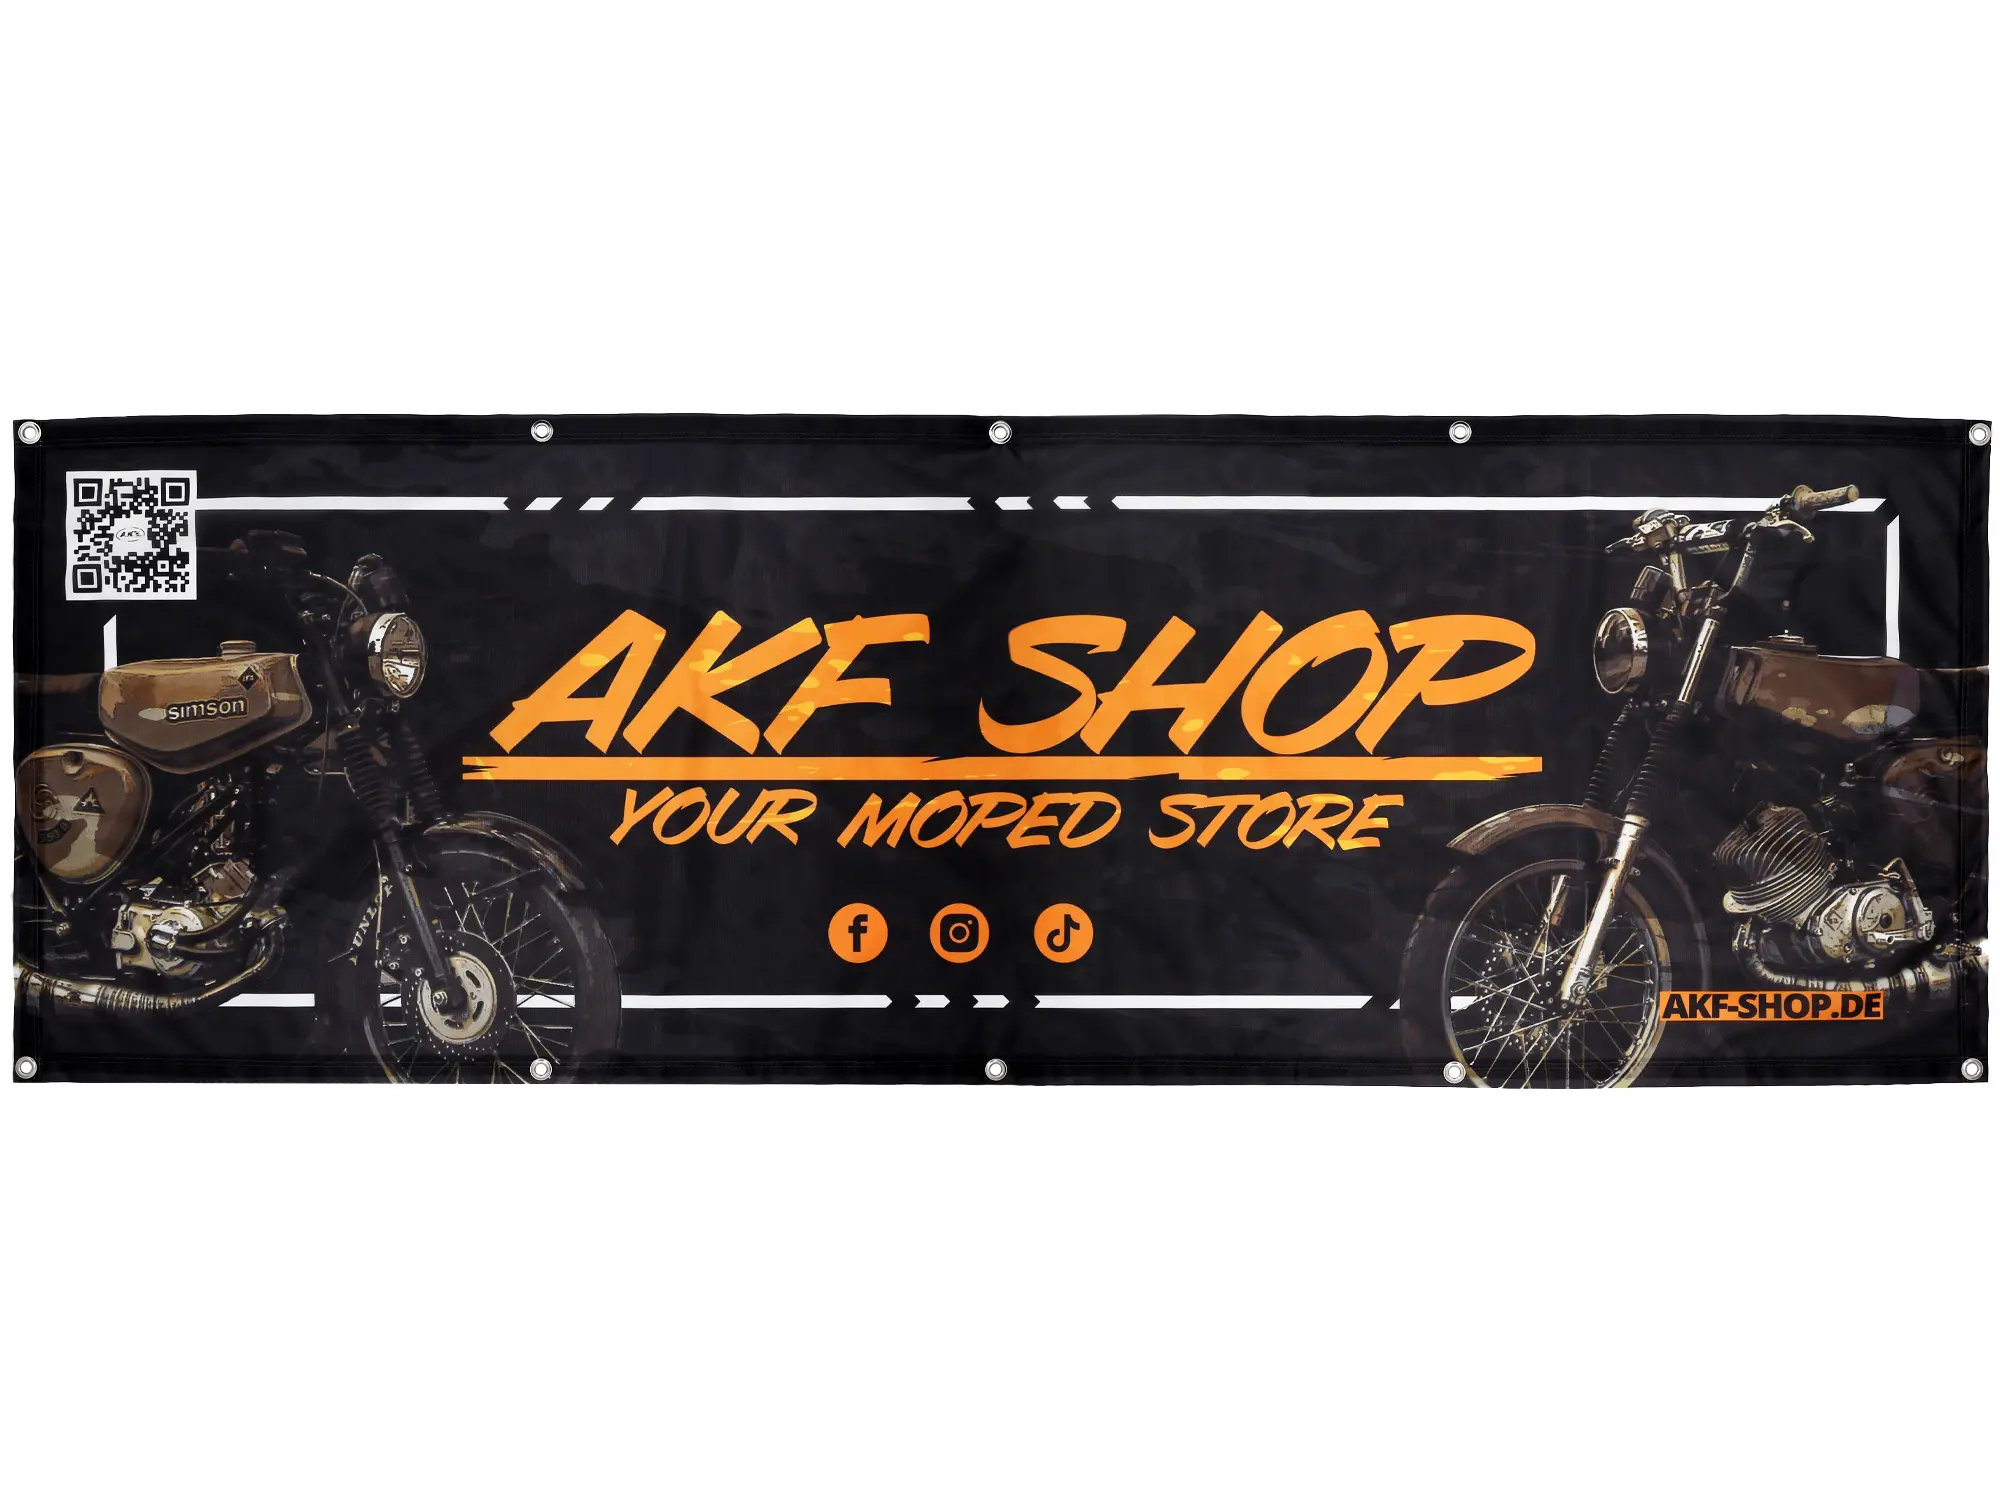 XL-Werkstattbanner AKF Shop - your moped store 215x73cm, Item no: 10076895 - Image 1